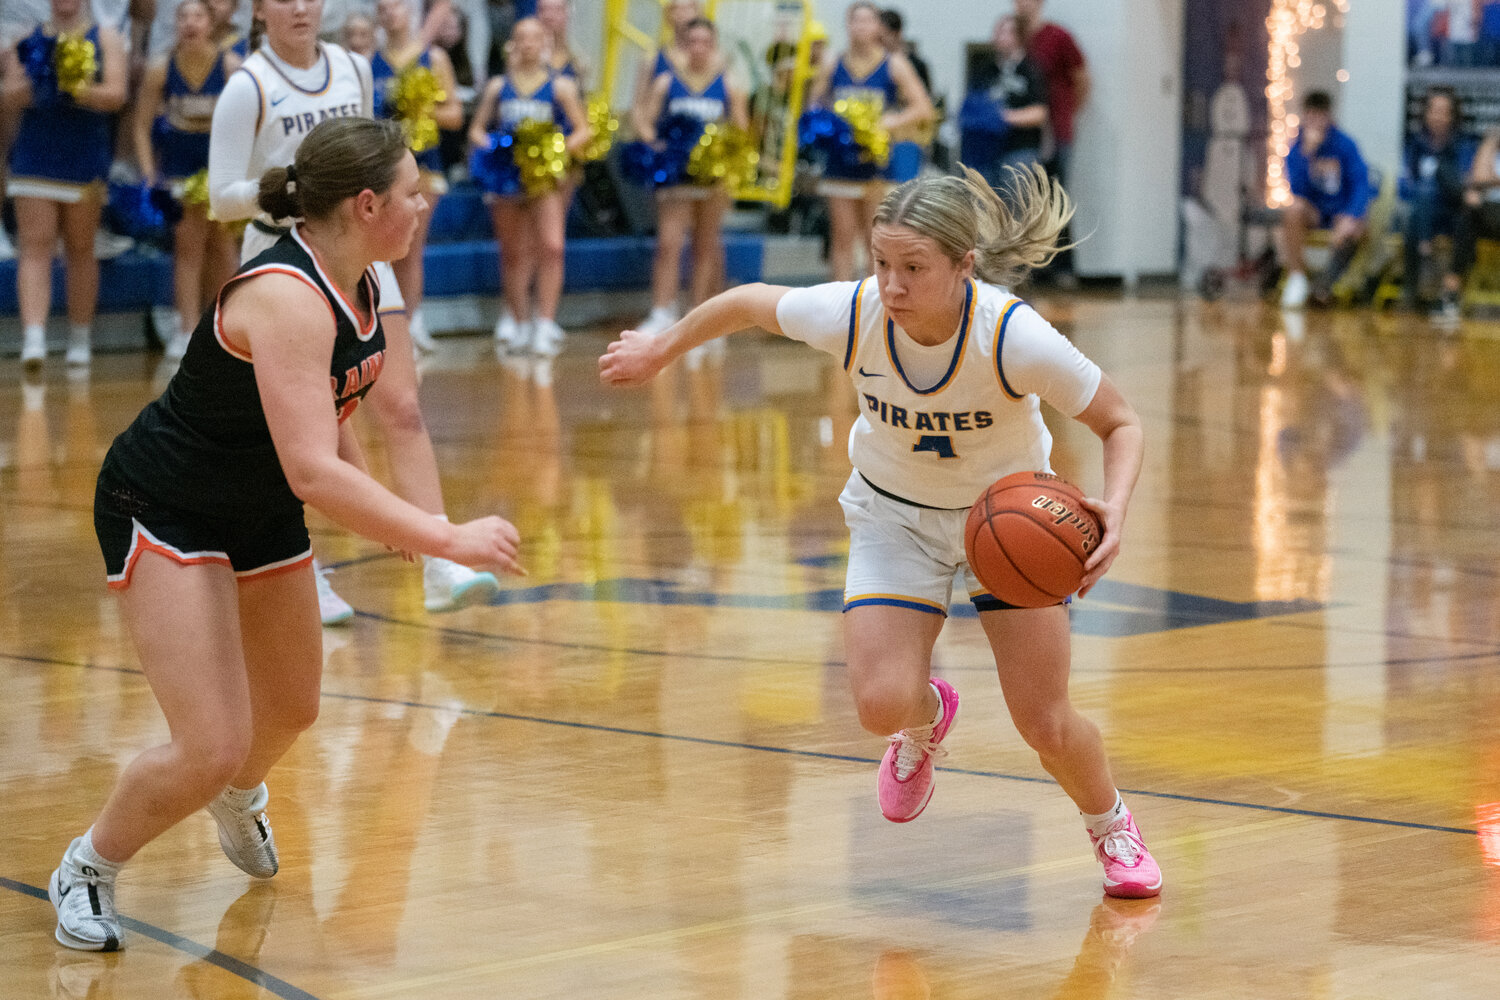 Karsyn Freeman tries to work around a defender during the first half of Adna's 52-49 loss to Rainier on Dec. 8.